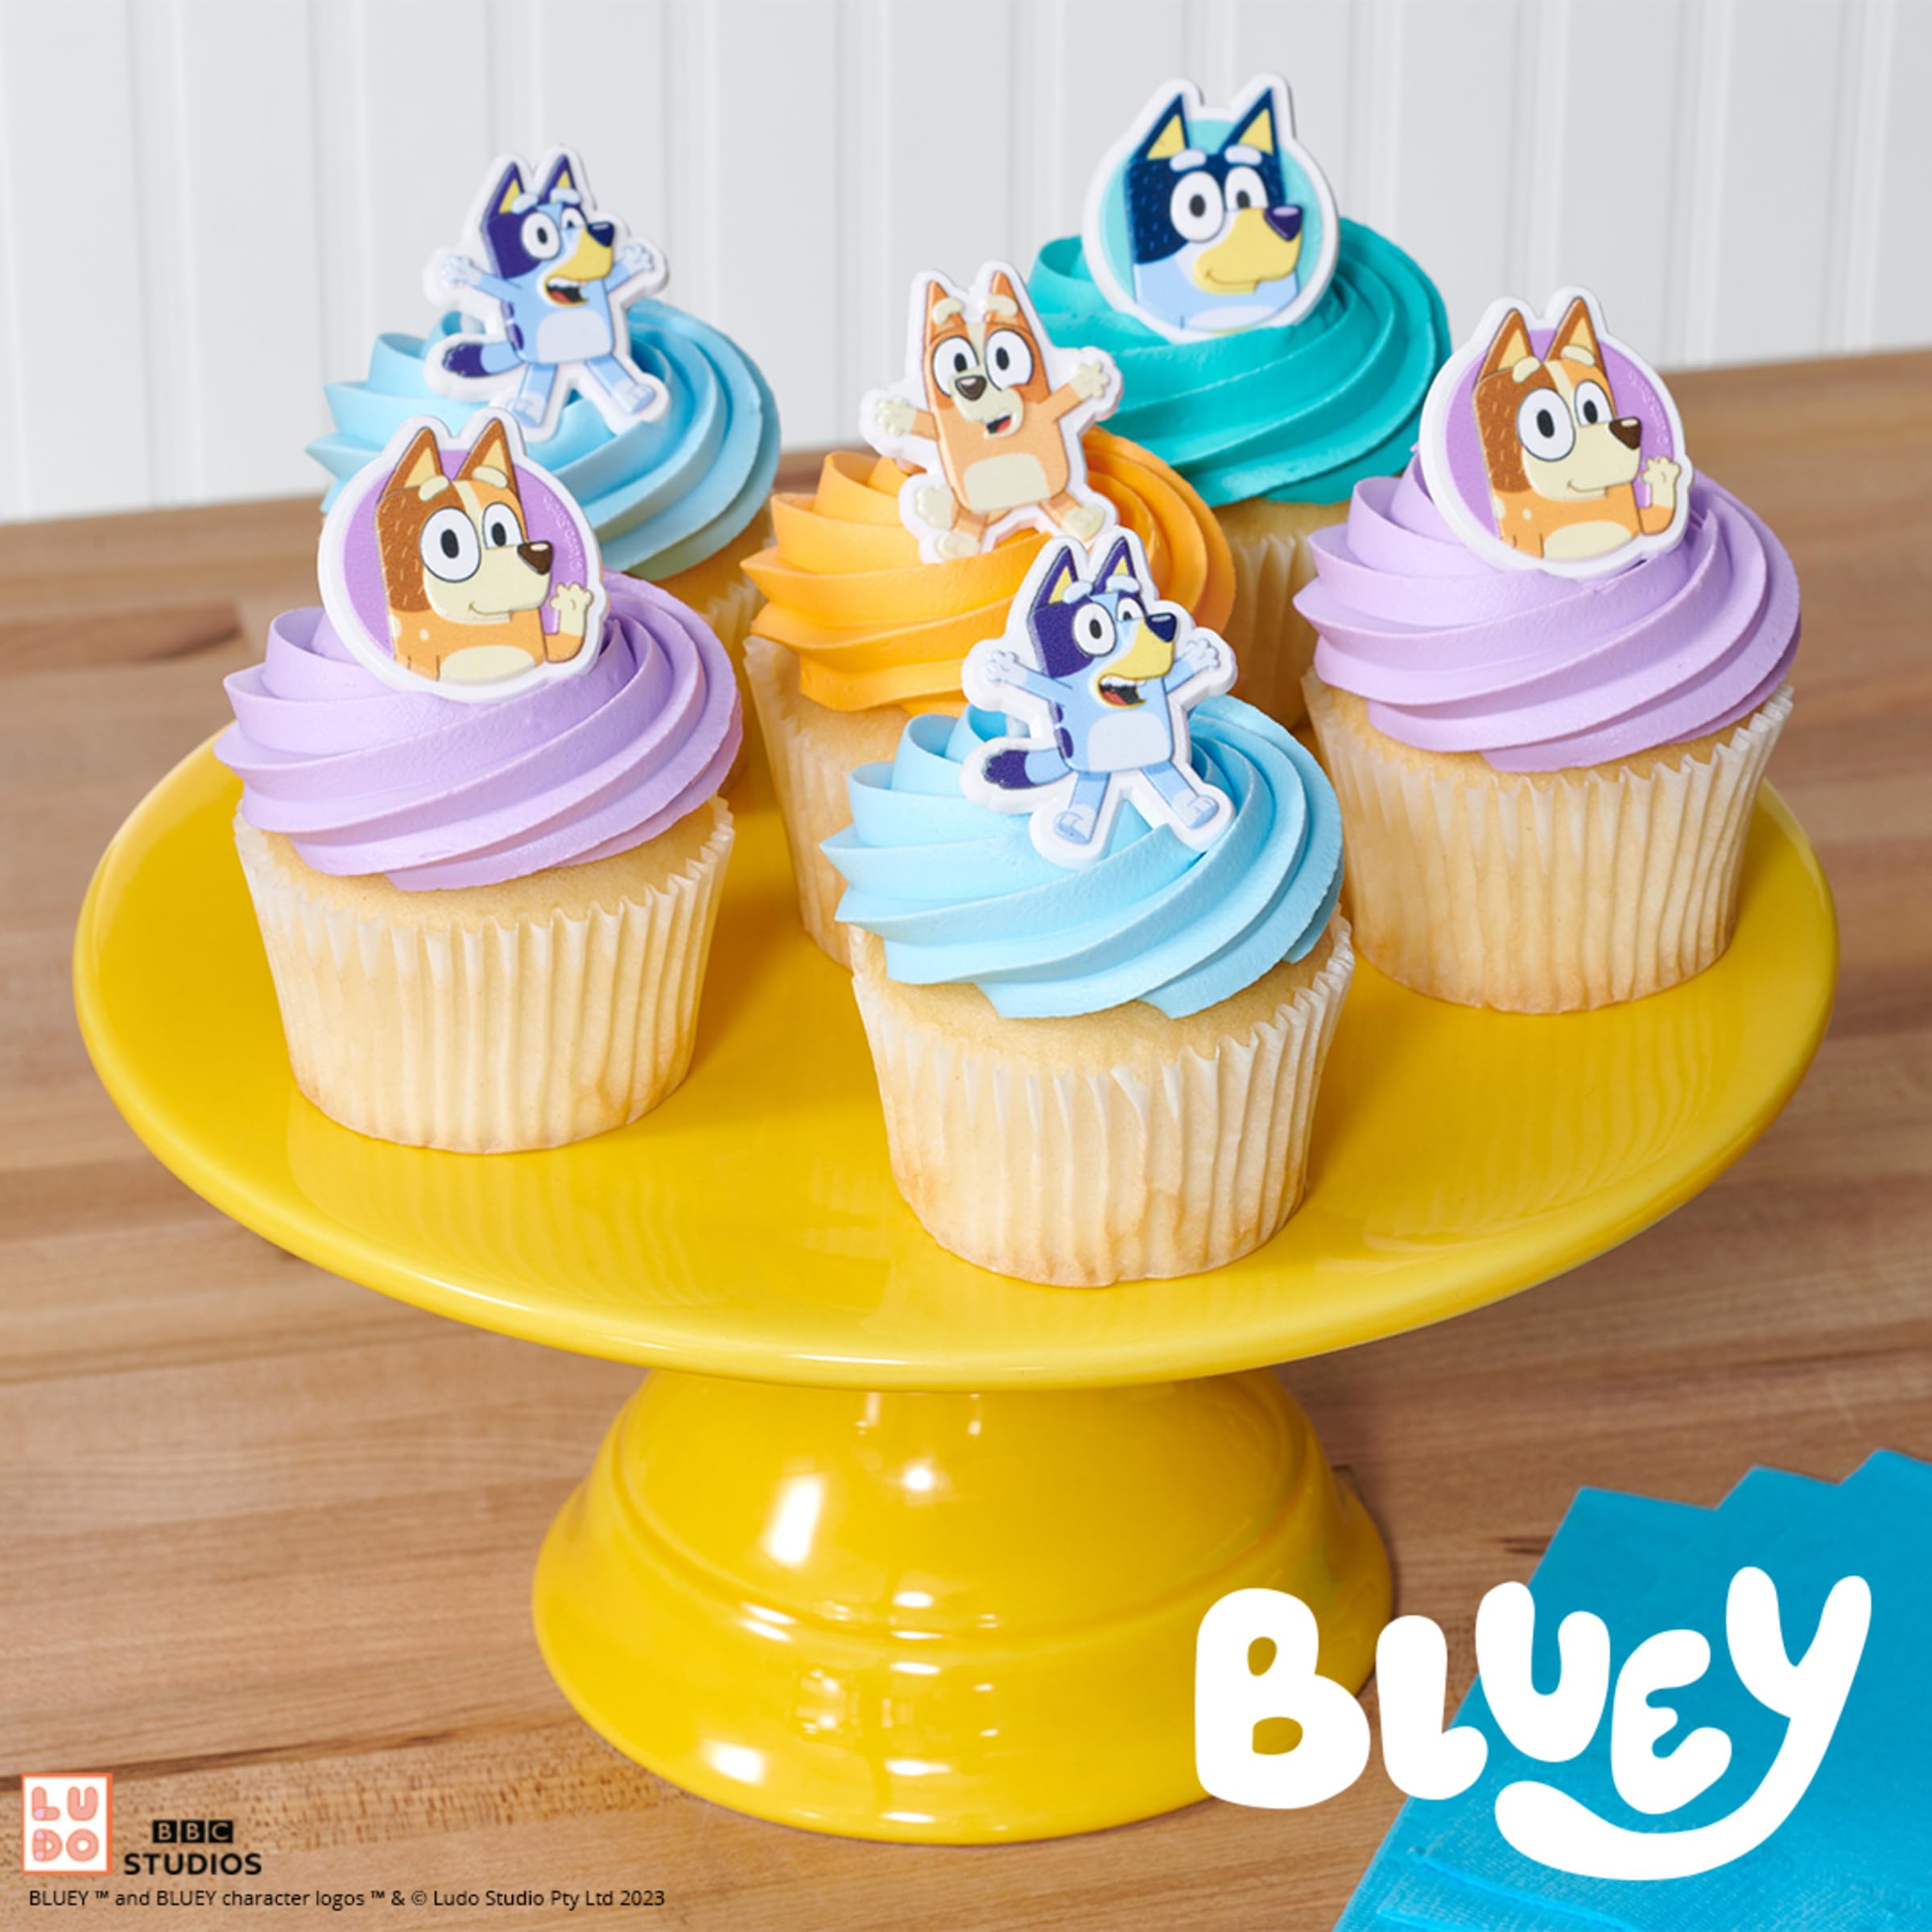 DecoPac Bluey So Much Fun Rings, Cupcake Decorations Featuring Bluey, Bingo, Bandit, and Chilli, 3D Food Safe Cake Toppers – 24 Pack